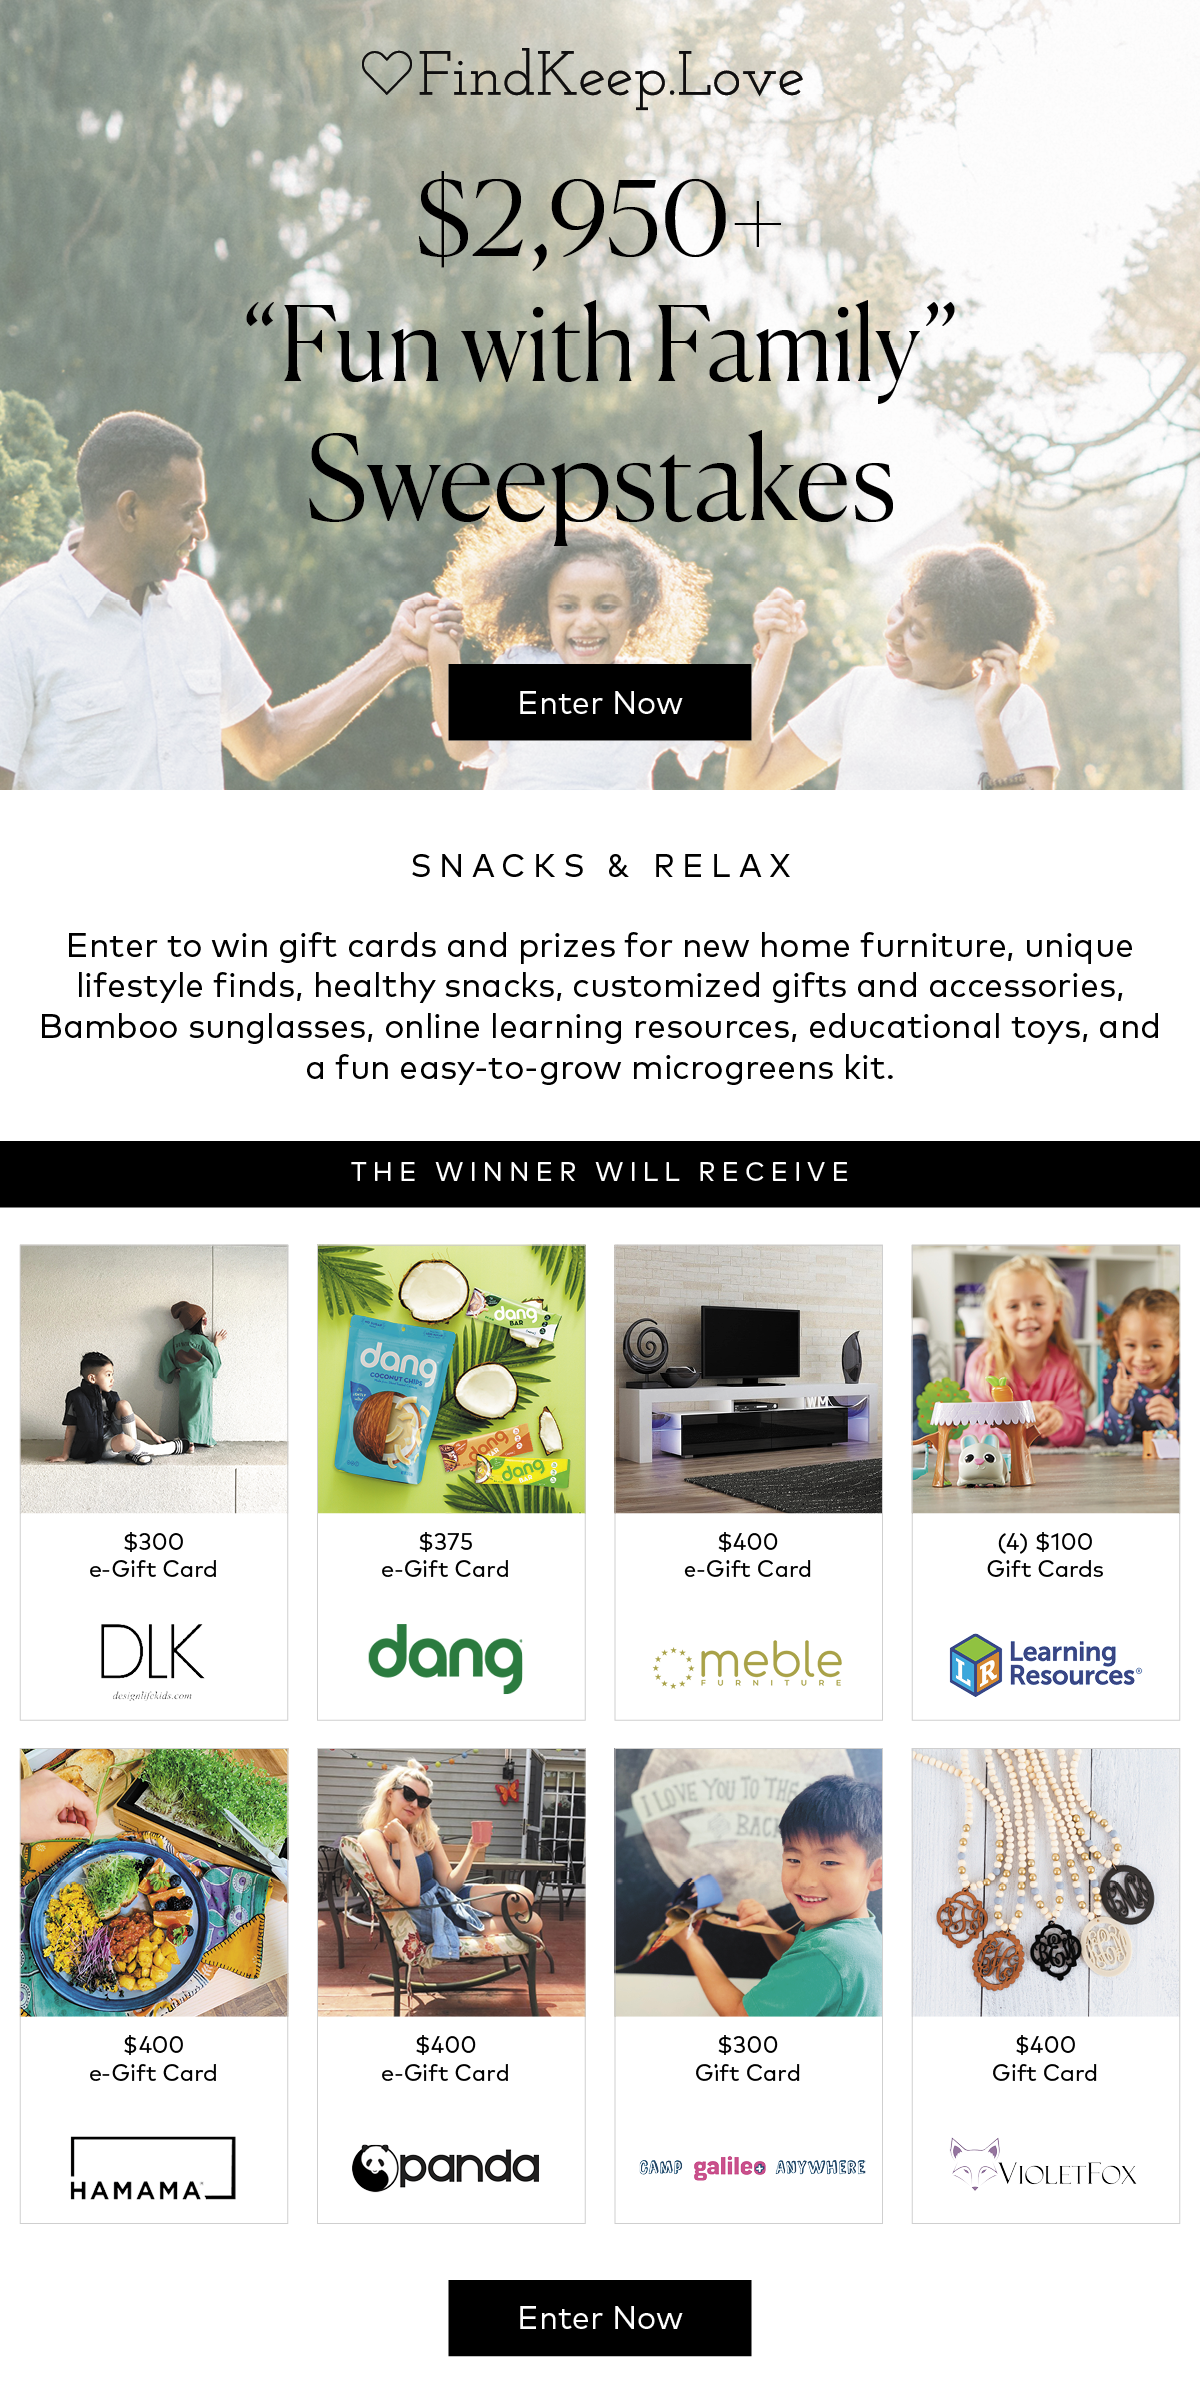 Snacks and relax giveaway